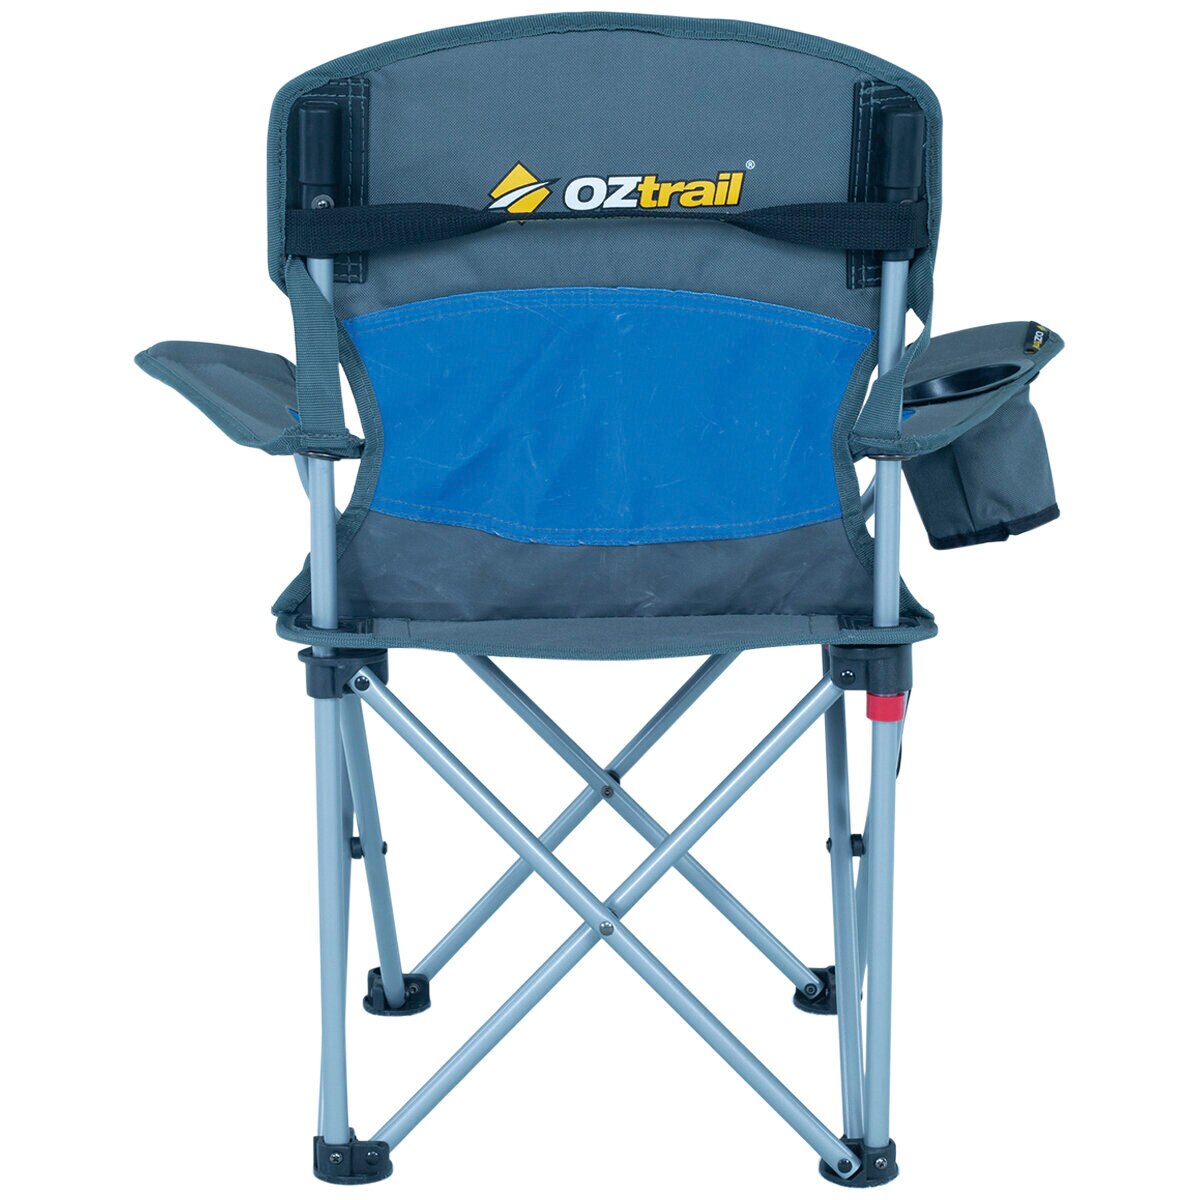 Oztrail Junior Deluxe Arm Chair